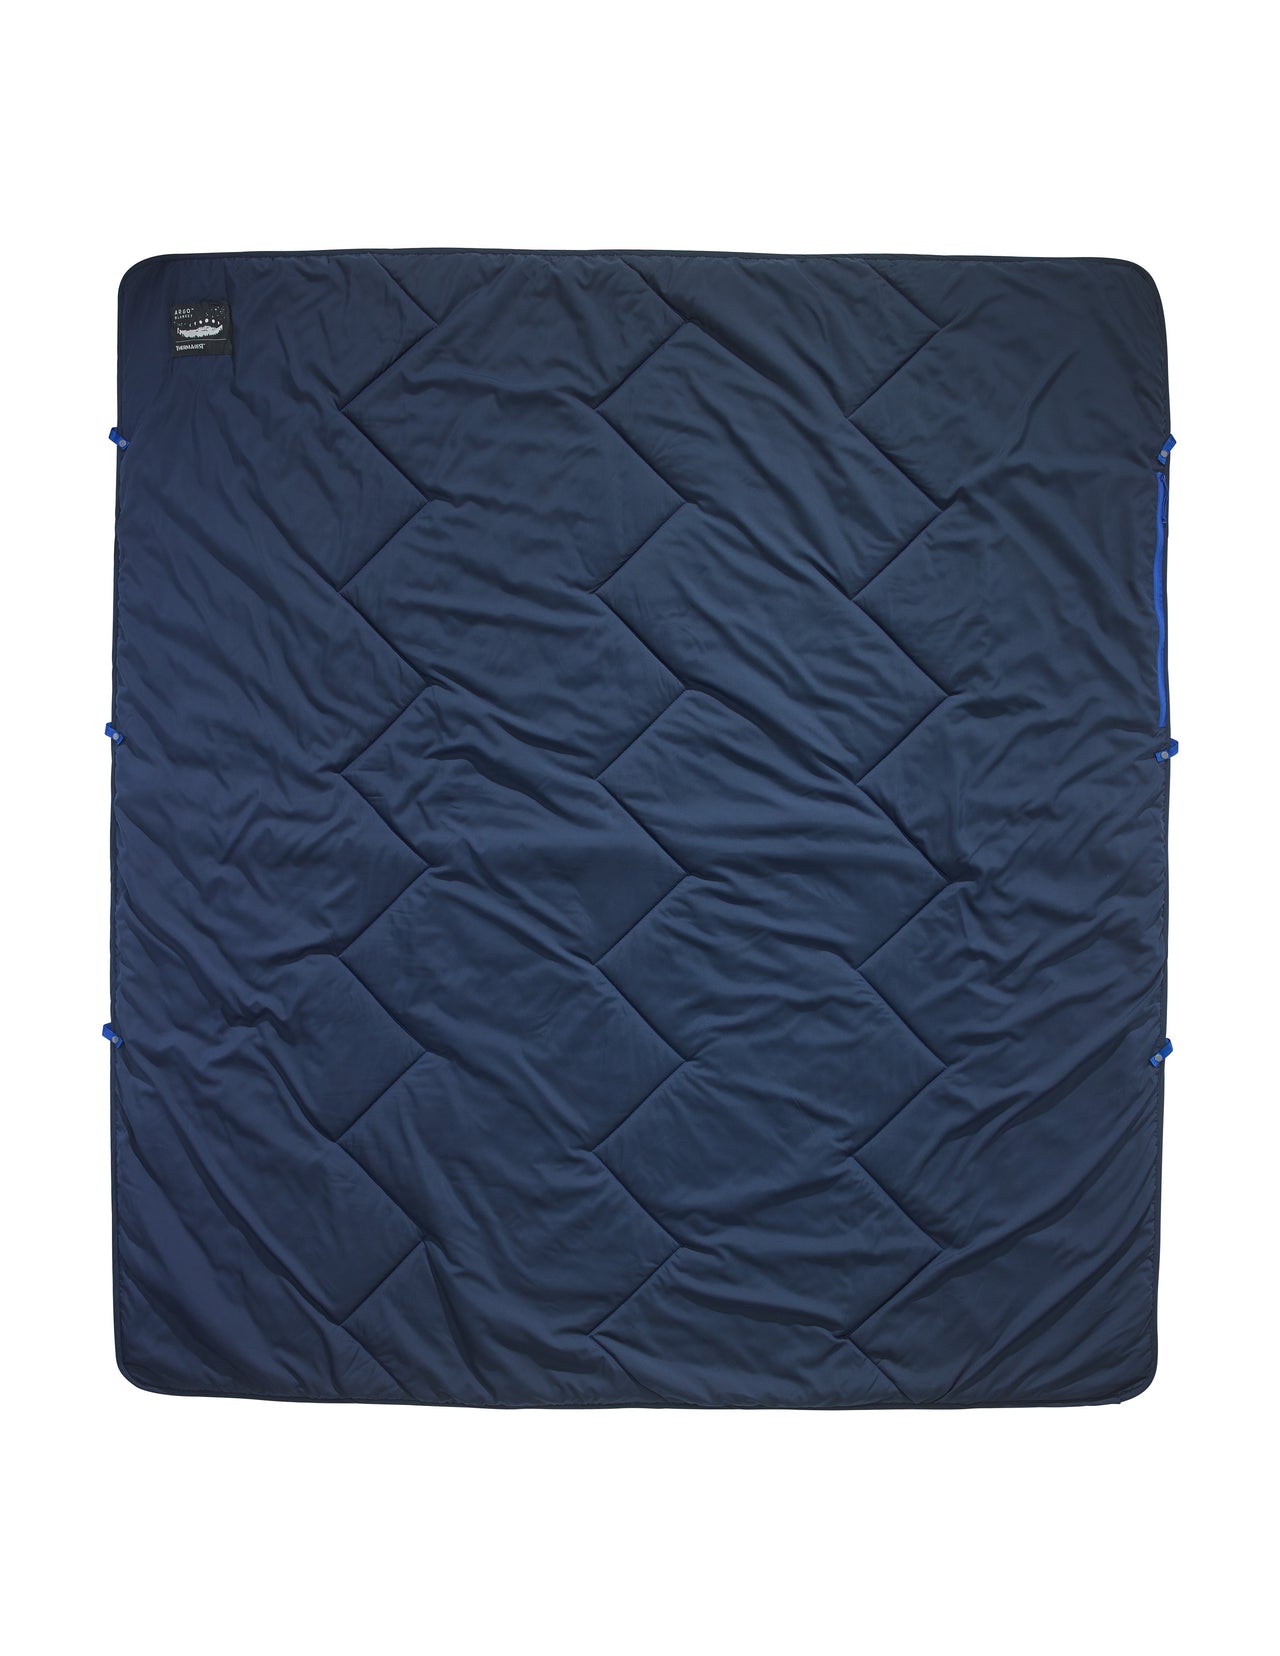 Argo Blanket OuterSpace Blue